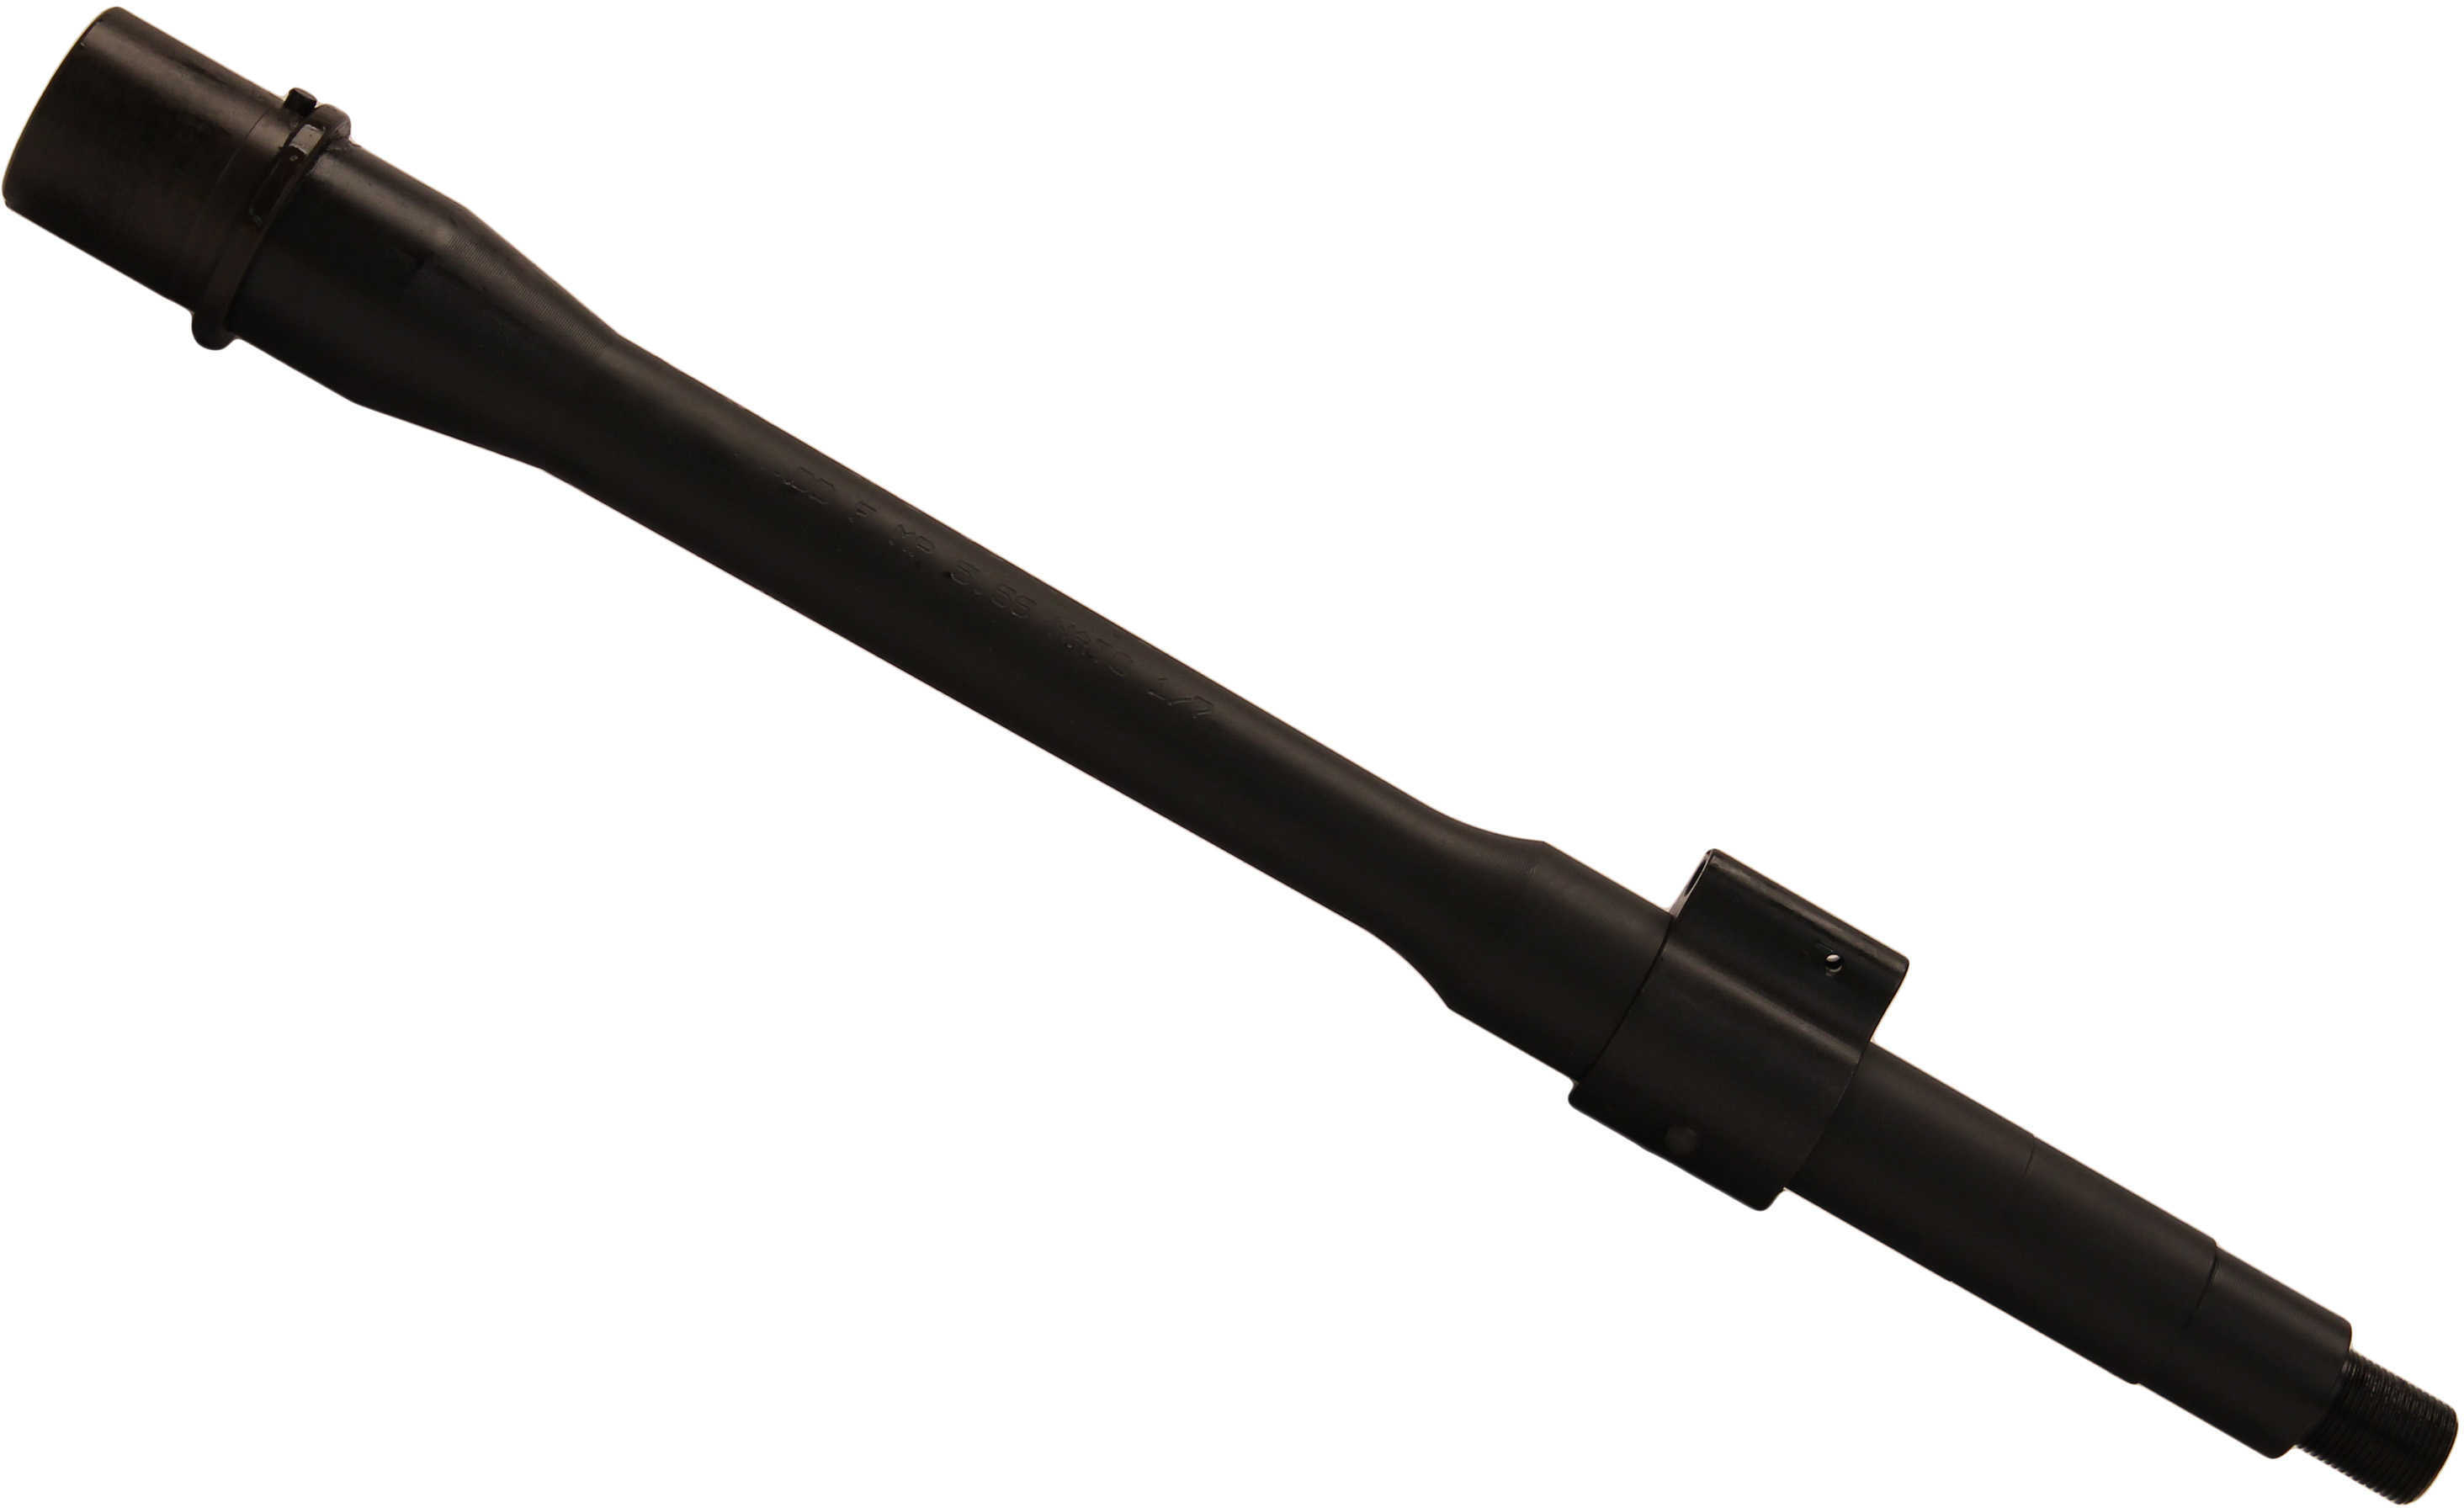 Daniel Defense Barrel Assembly CMV CHF 5.56/1:7 11 1/2" Government Carbine with LPG Md: 07-077-07108